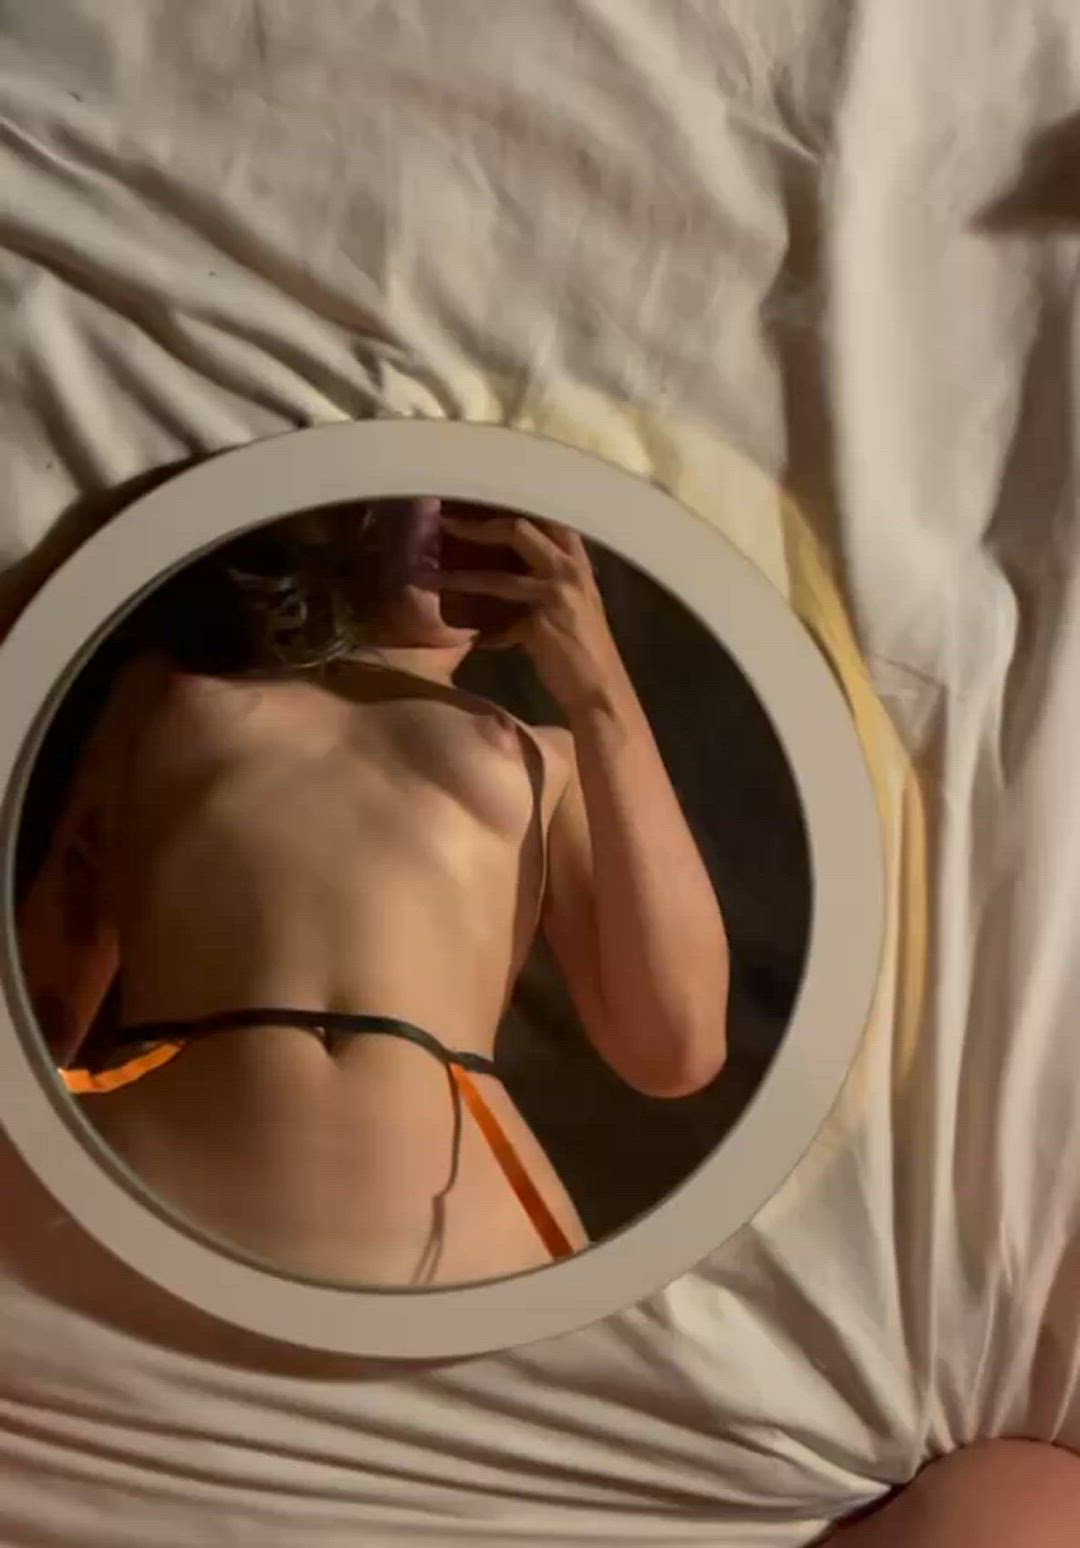 Mirror porn video with onlyfans model lilithskids <strong>@lilithskids</strong>